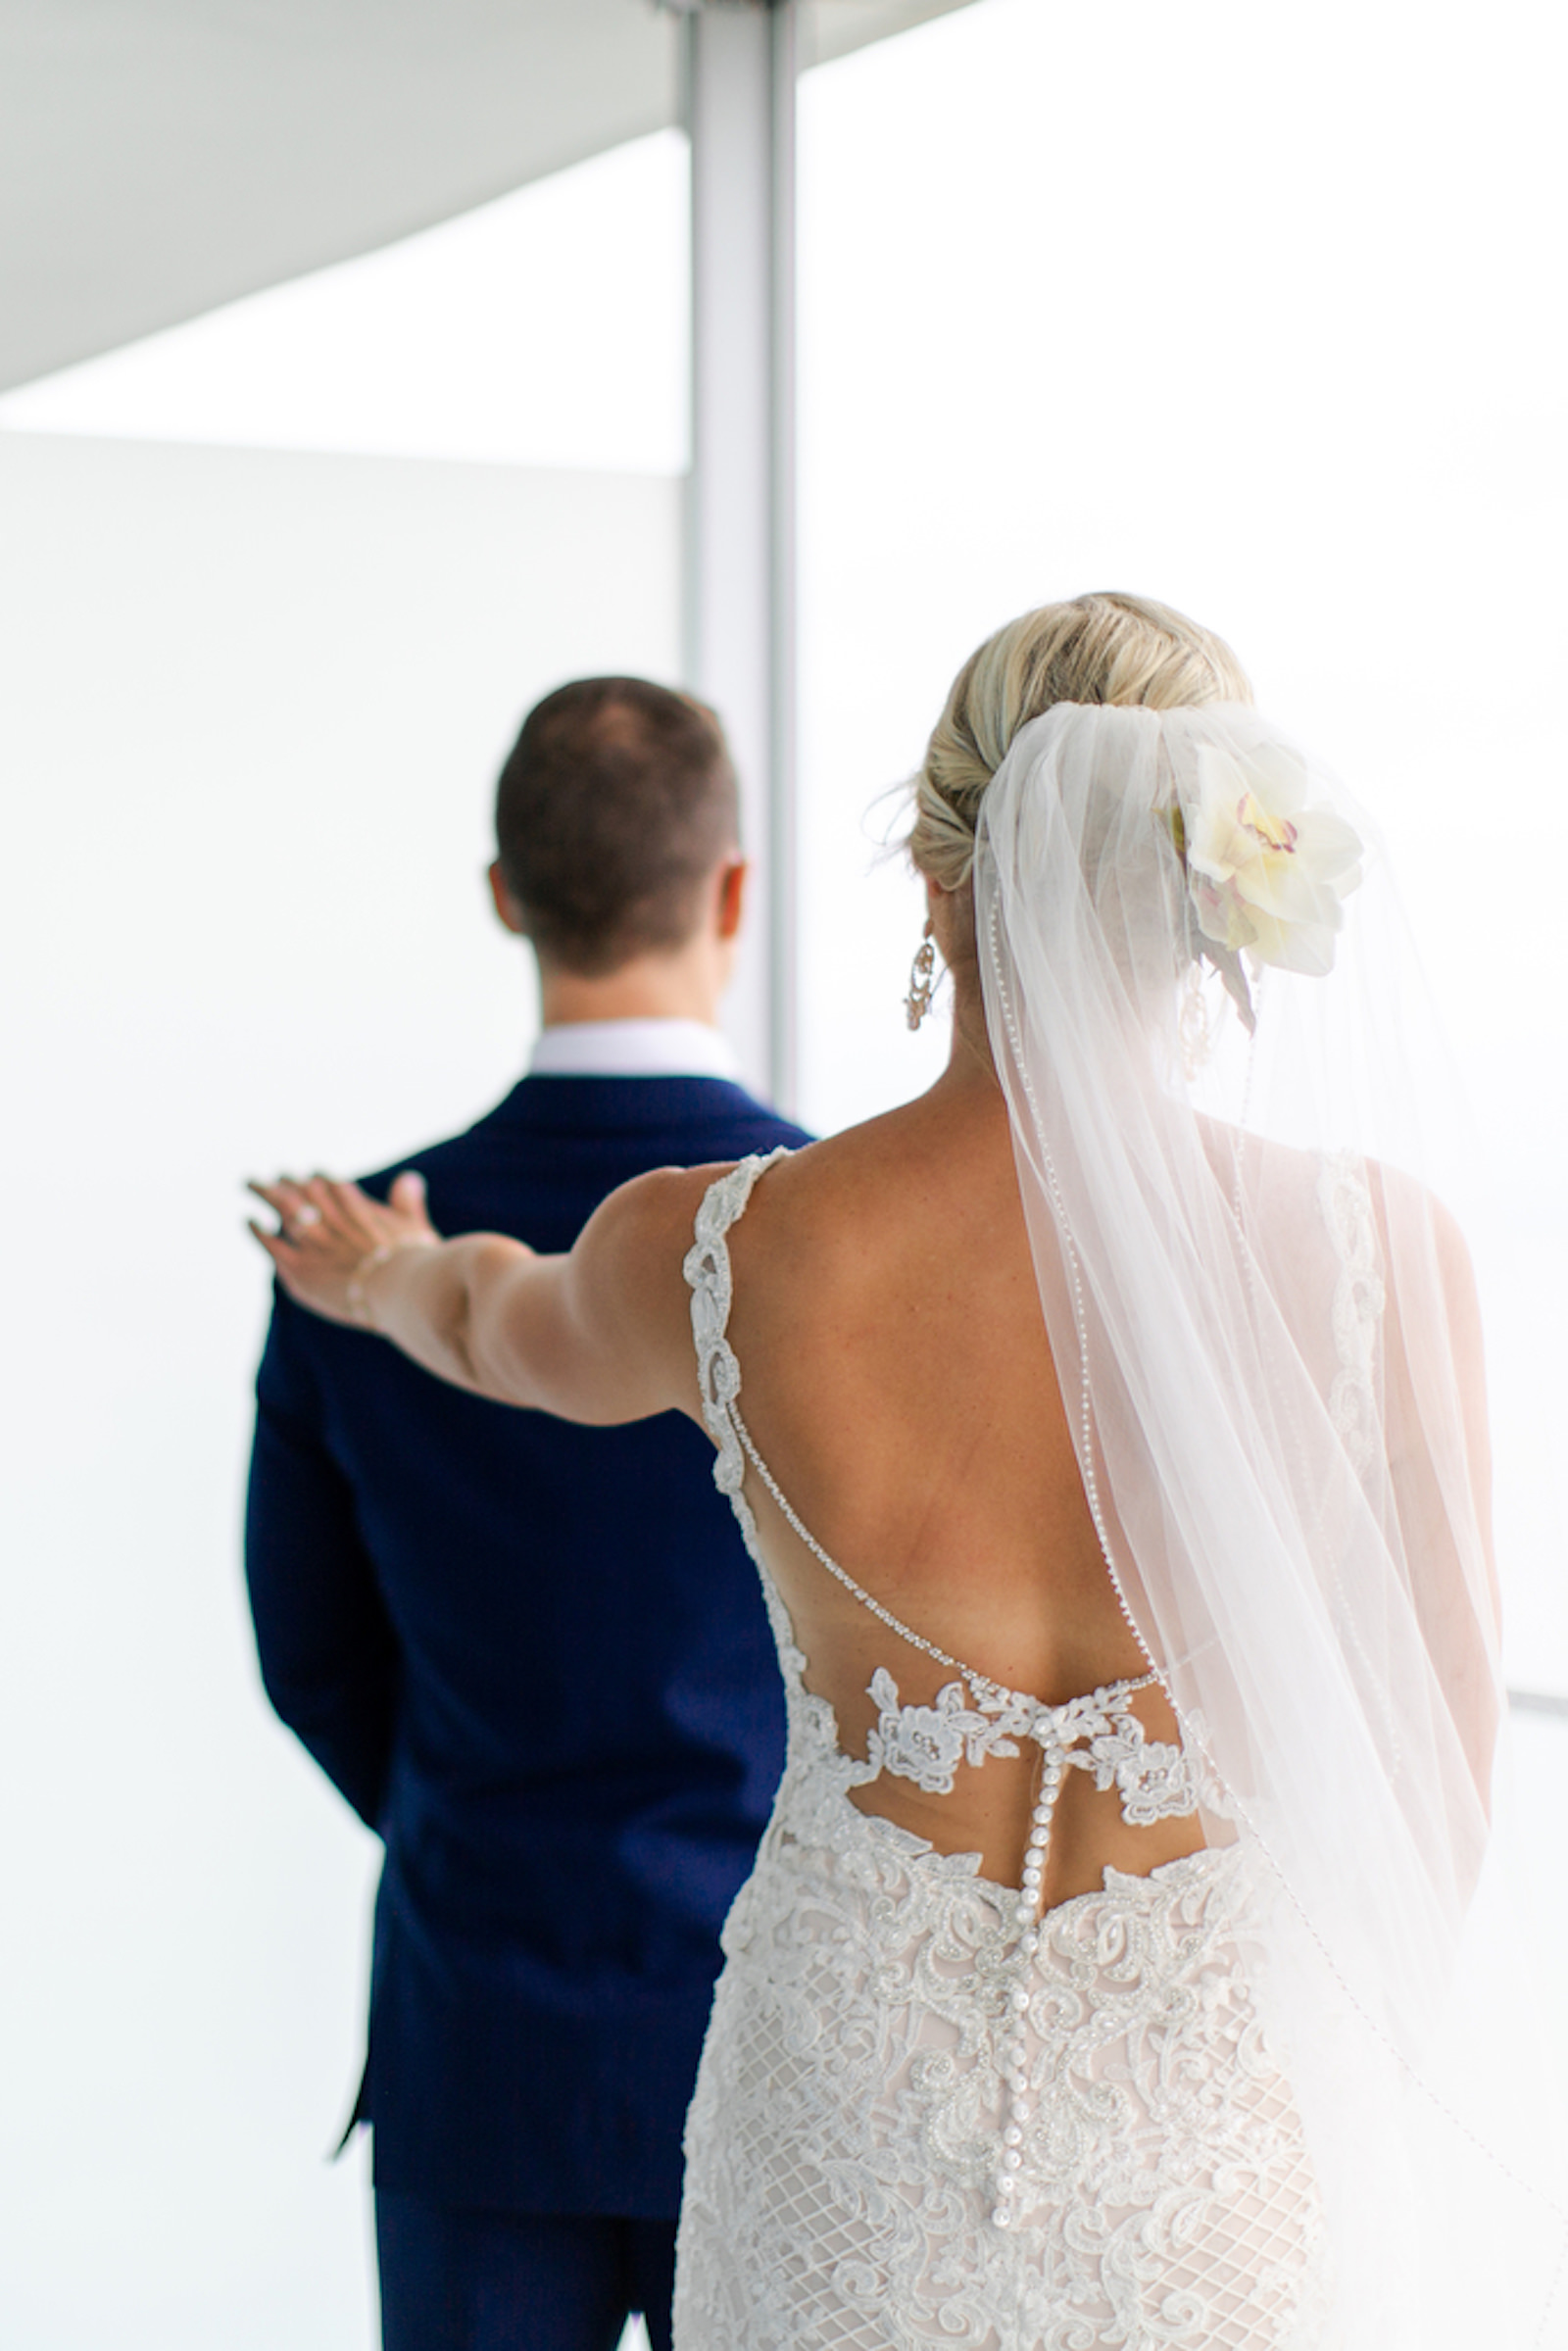 Tropical Florida Bride in Lace and Illusion Low Open Back Wedding Dress with Pearl Buttons First Look Picture with Groom